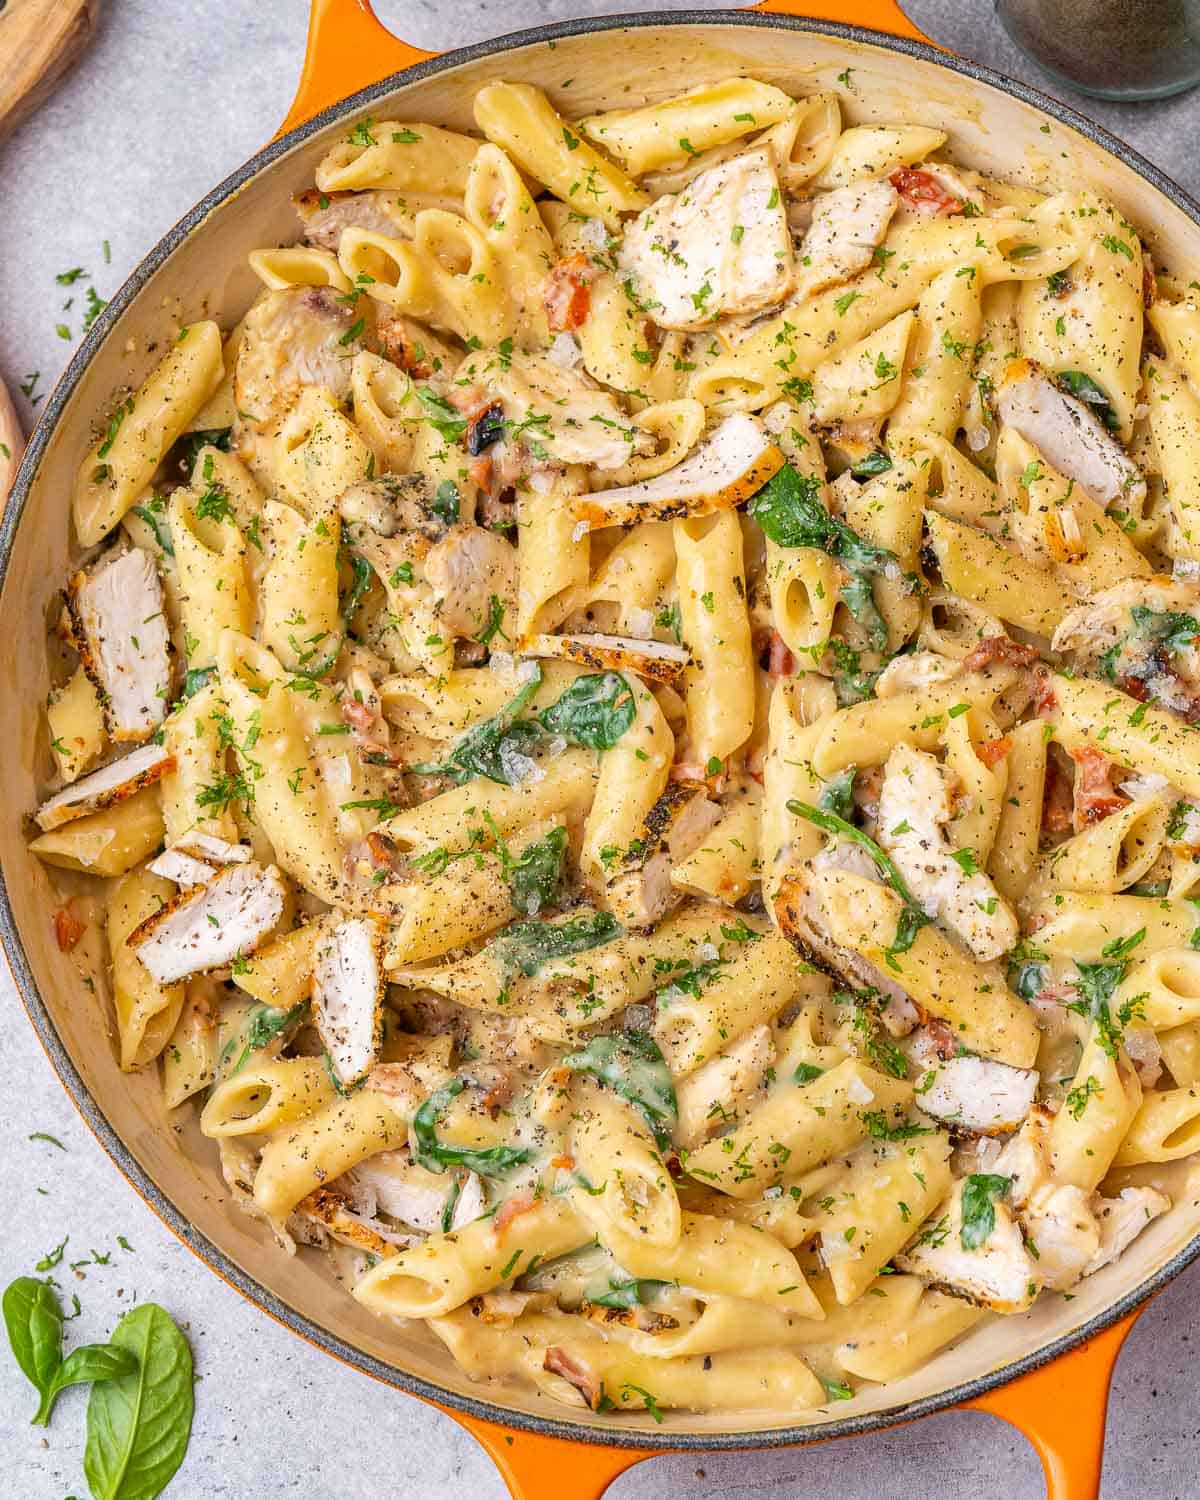 Spinach and Grilled Chicken Pasta